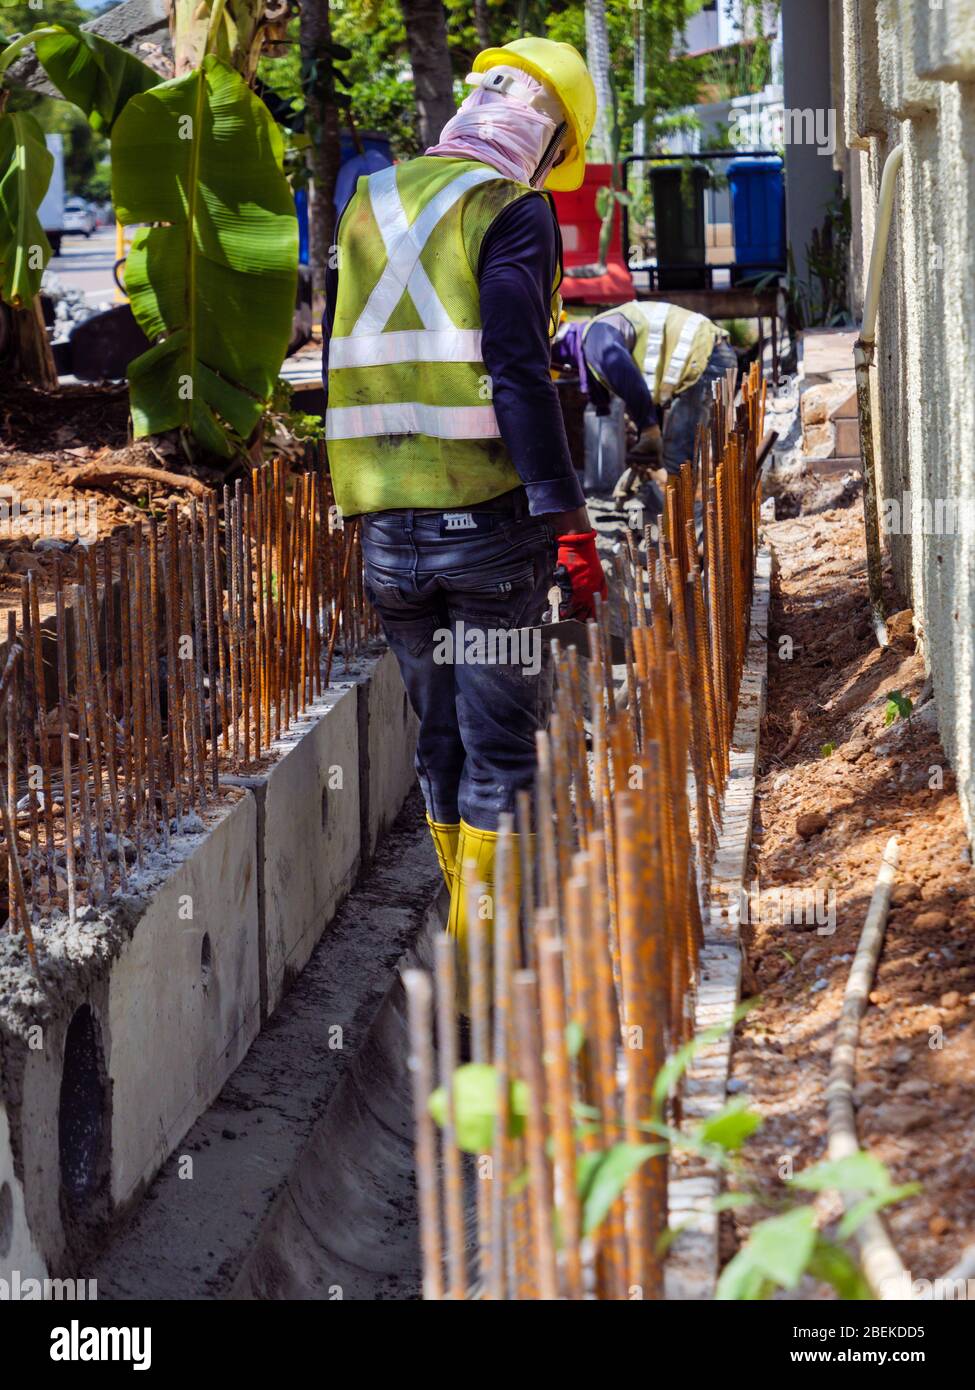 SINGAPORE – 3 MAR 2020 – Construction workers in high visibility protective gear working on a drain at a road works site in Singapore Stock Photo